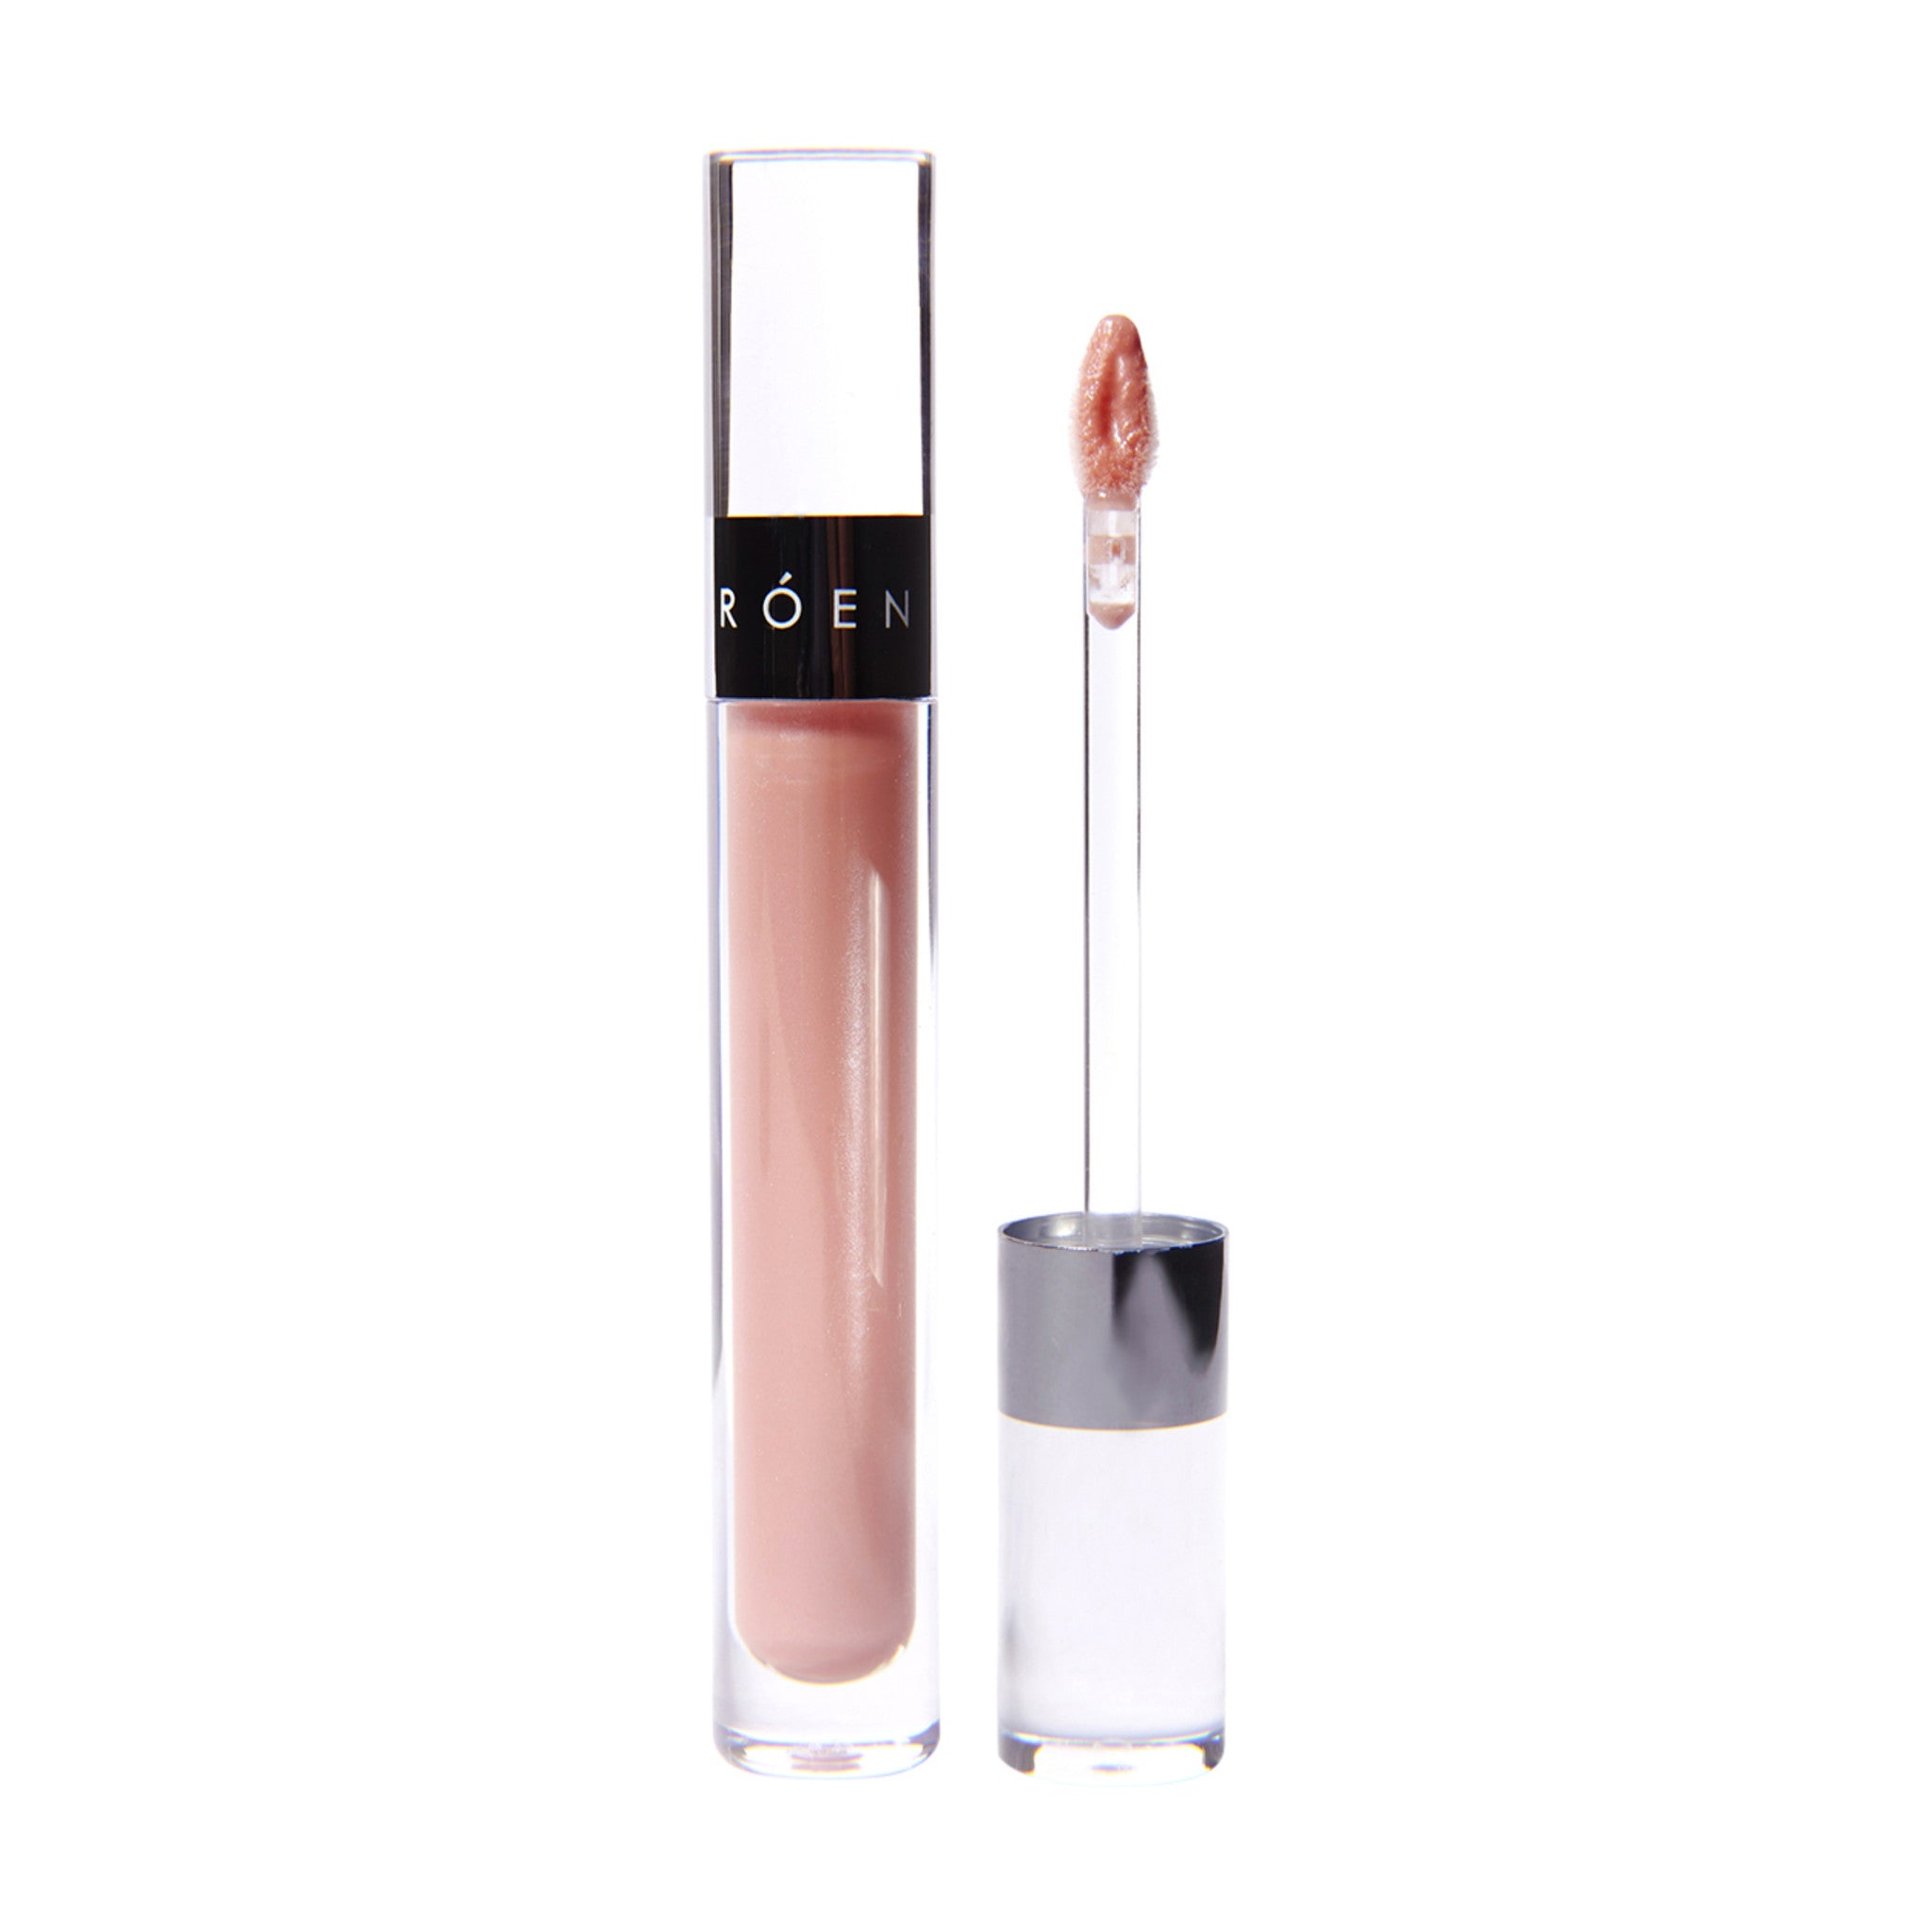 Róen Kiss My Liquid Lip Balm Color/Shade variant: Shimmer Rumor main image. This product is in the color pink